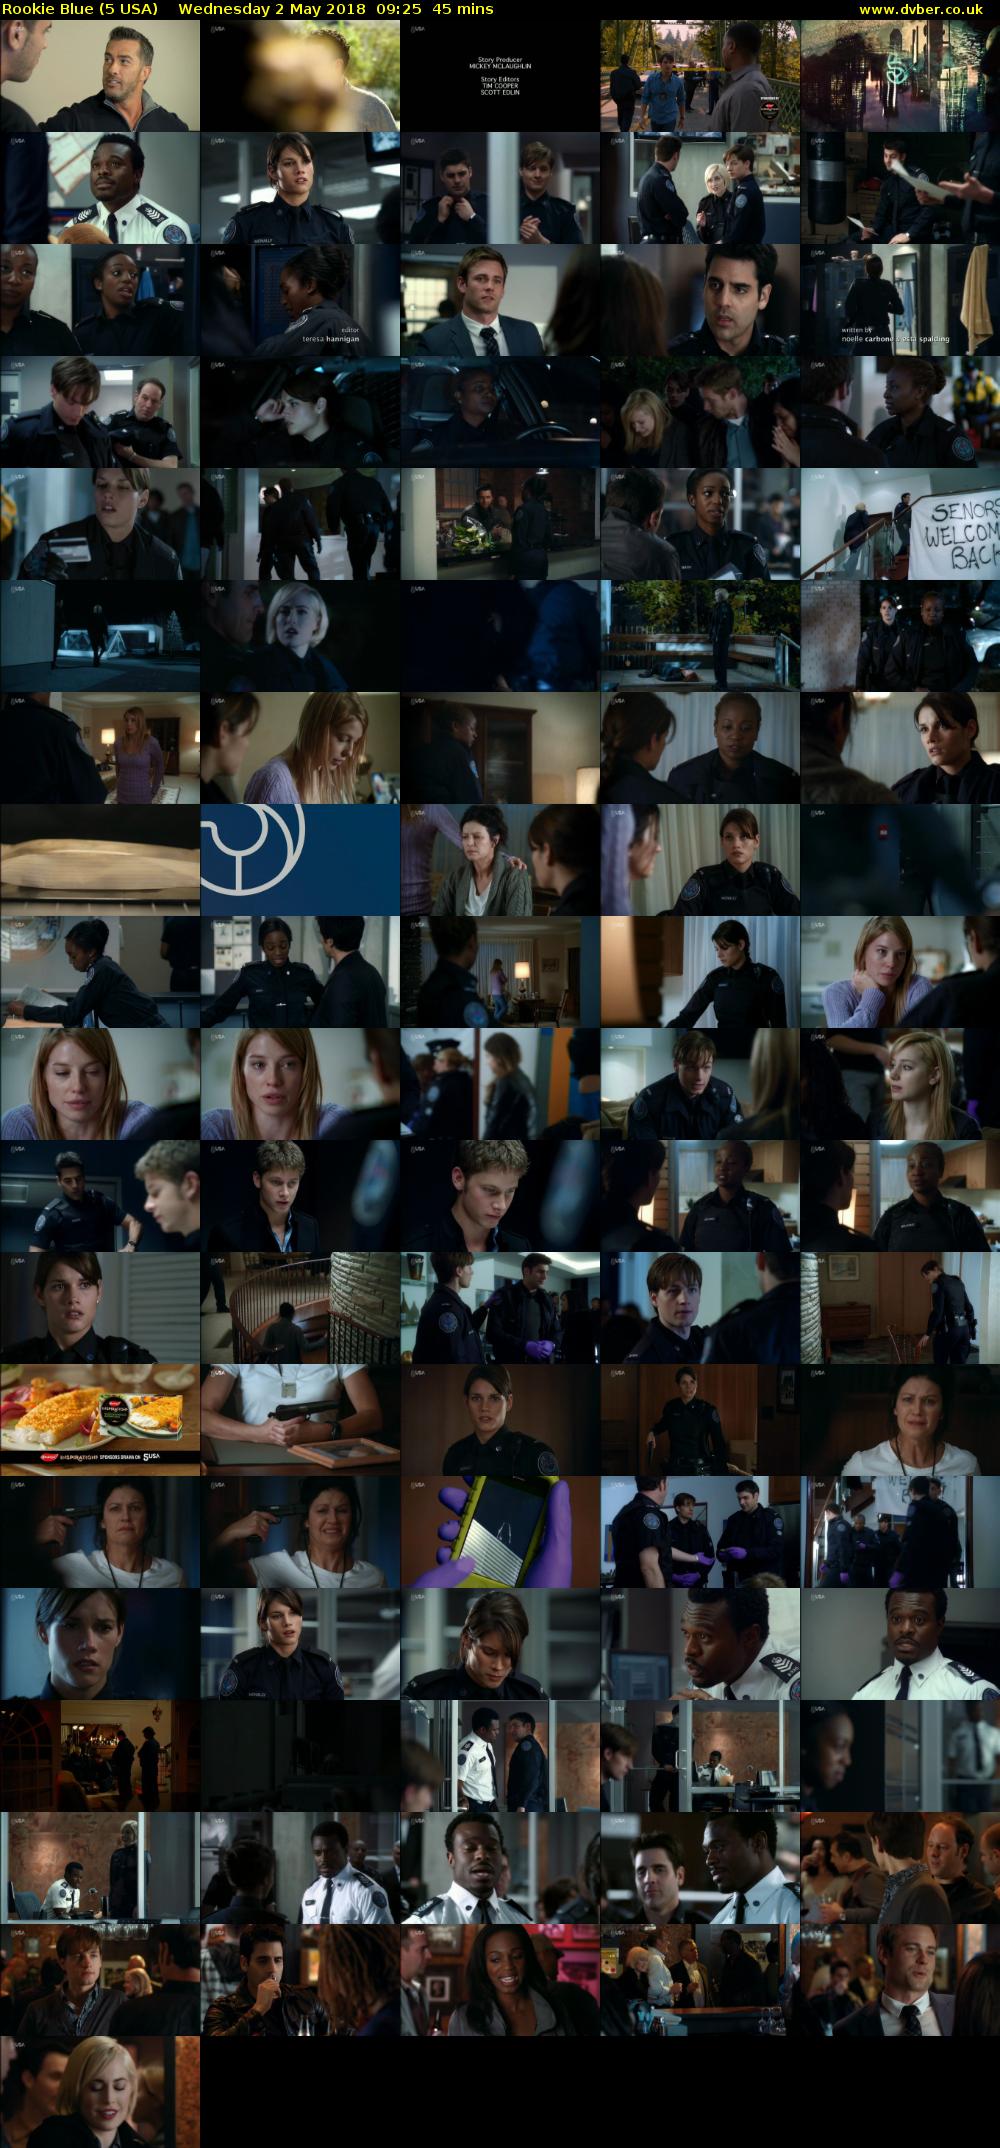 Rookie Blue (5 USA) Wednesday 2 May 2018 09:25 - 10:10